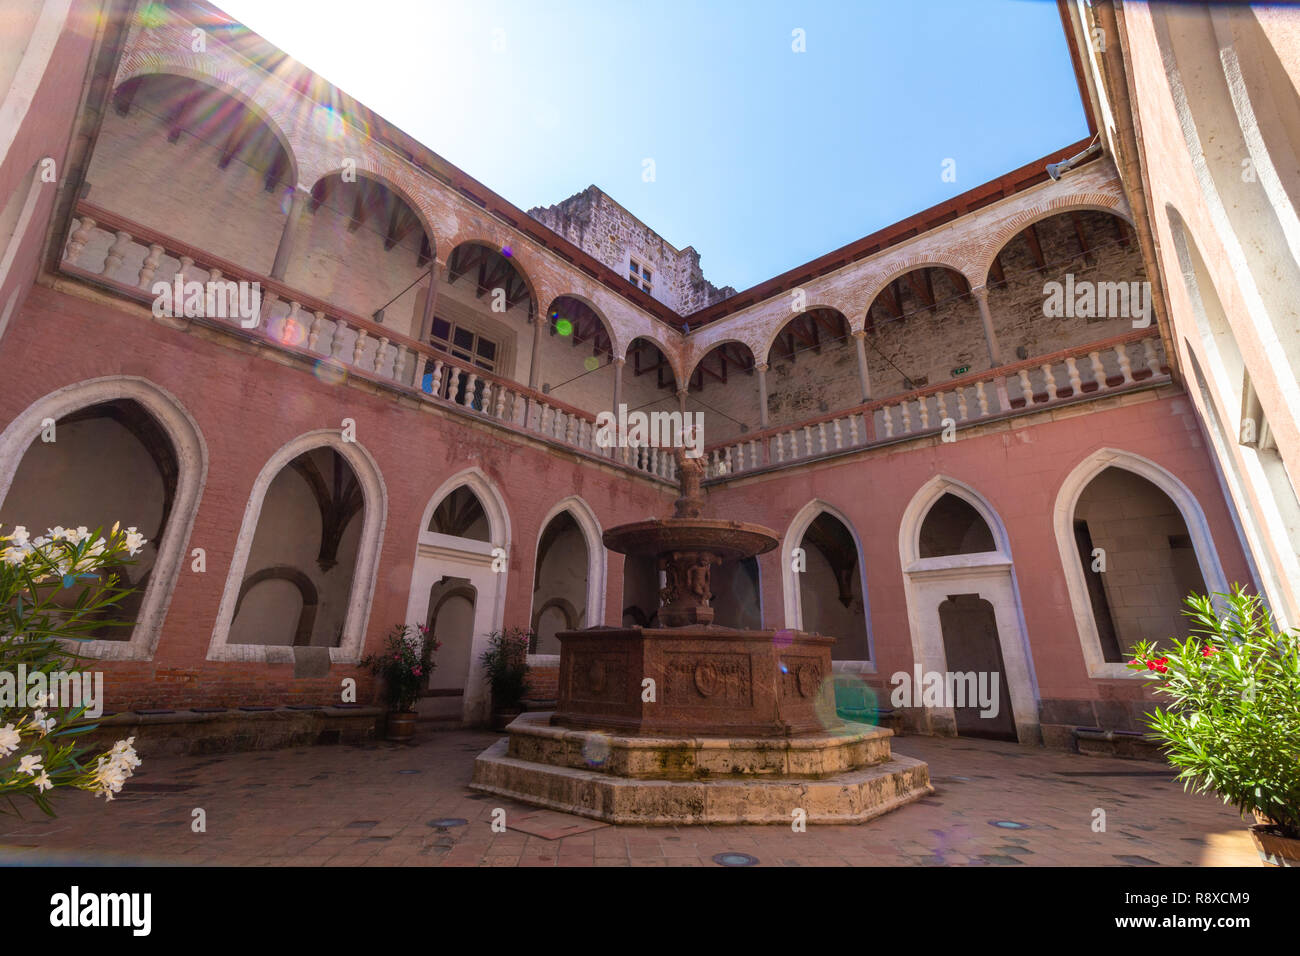 Renaissance Royal Palace in Visegrad, Hungary, inner courtyard with marble fountain (Herkules-kut), built in the 14-15th century Stock Photo